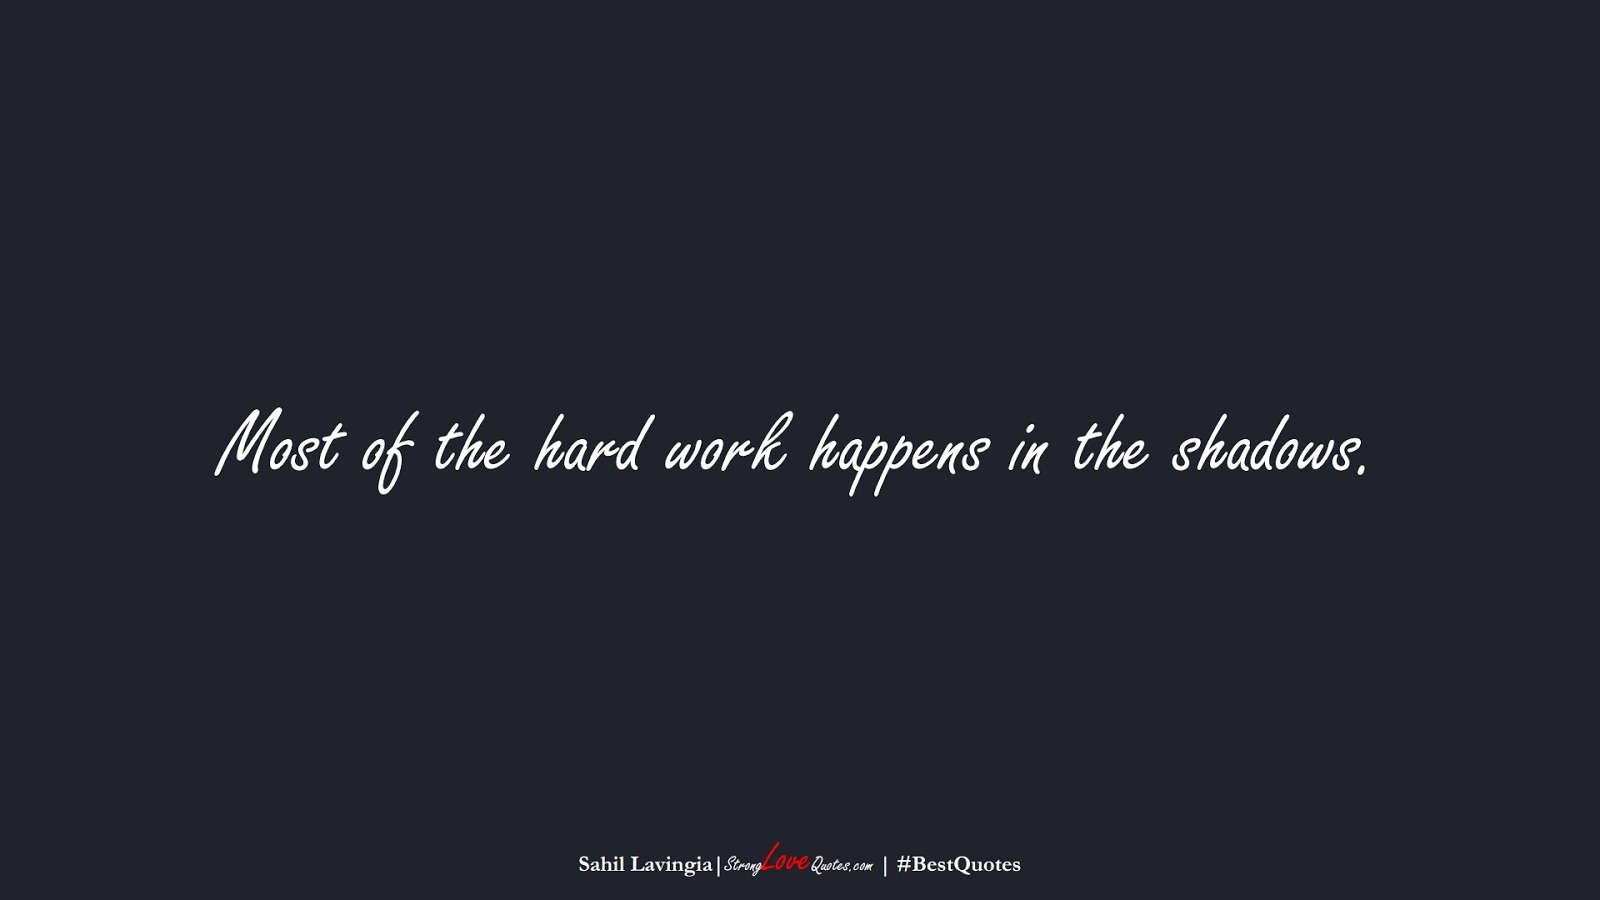 Most of the hard work happens in the shadows. (Sahil Lavingia);  #BestQuotes